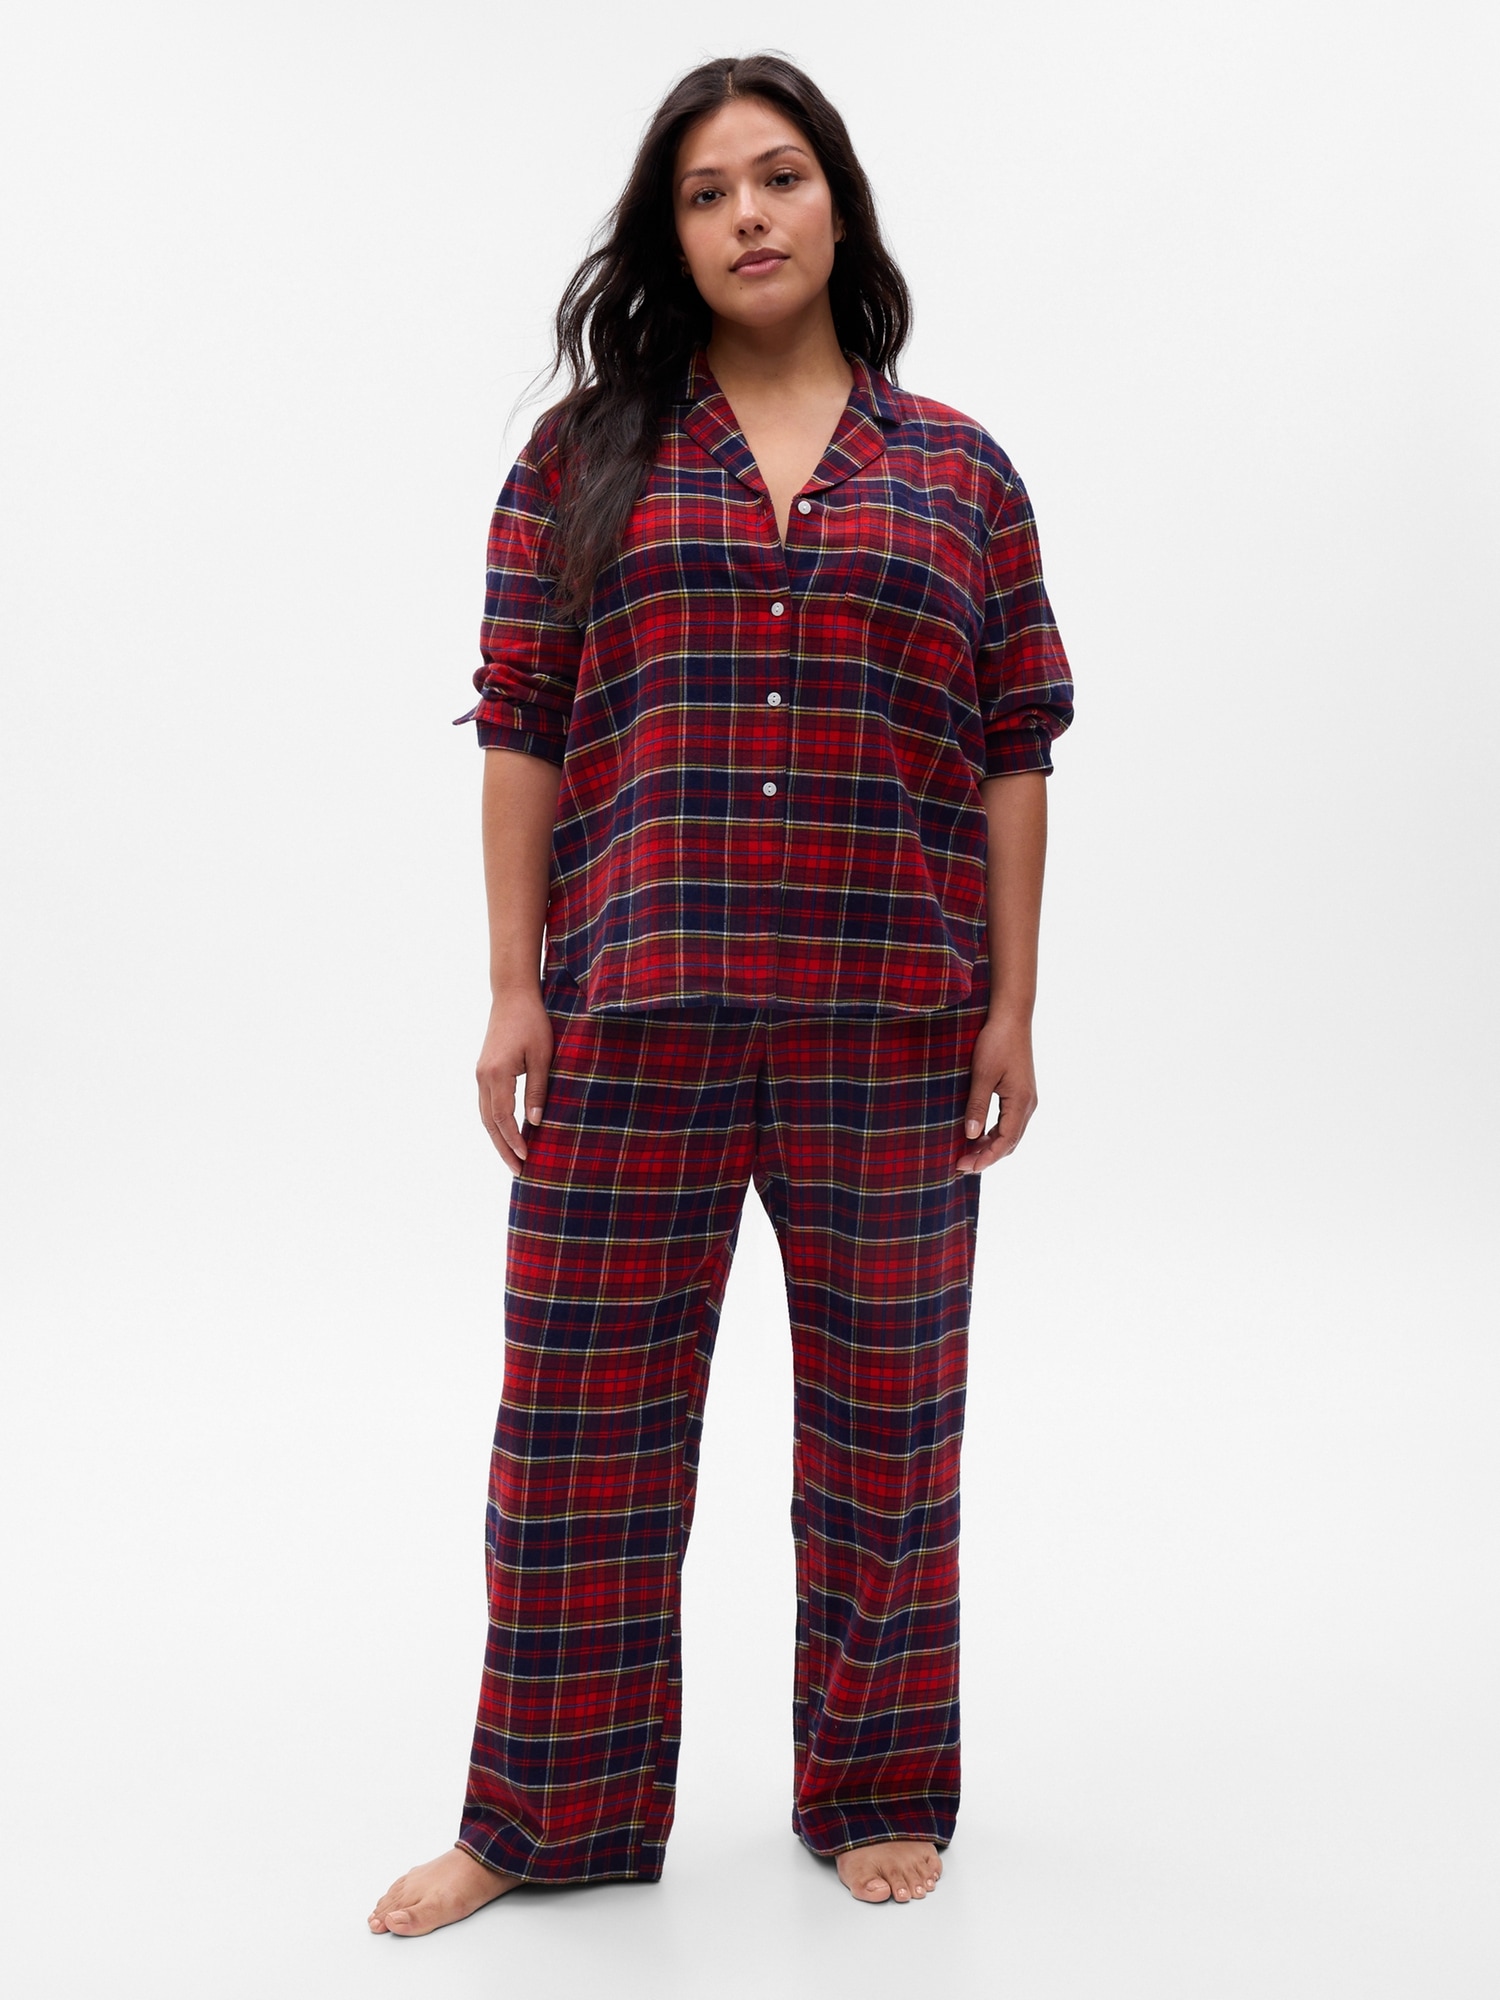 Cheap Pajamas Women's Winter Three-layer Thickened Flannel Cute Can Be Worn  Outside with Large-size Warm Quilted Home Clothes Soft and Warm